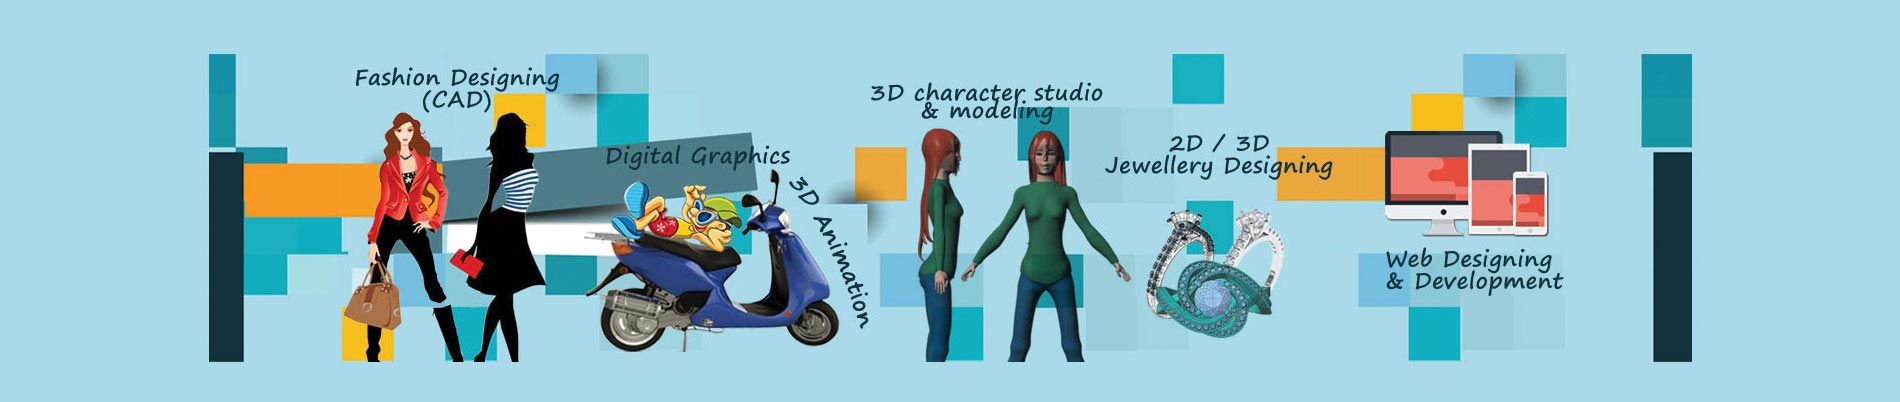 Animation Courses in Mumbai|Learn Animation|Diploma Course in Animation  Mumbai,India|Short Term Career Oriented Professional Courses in Animation.